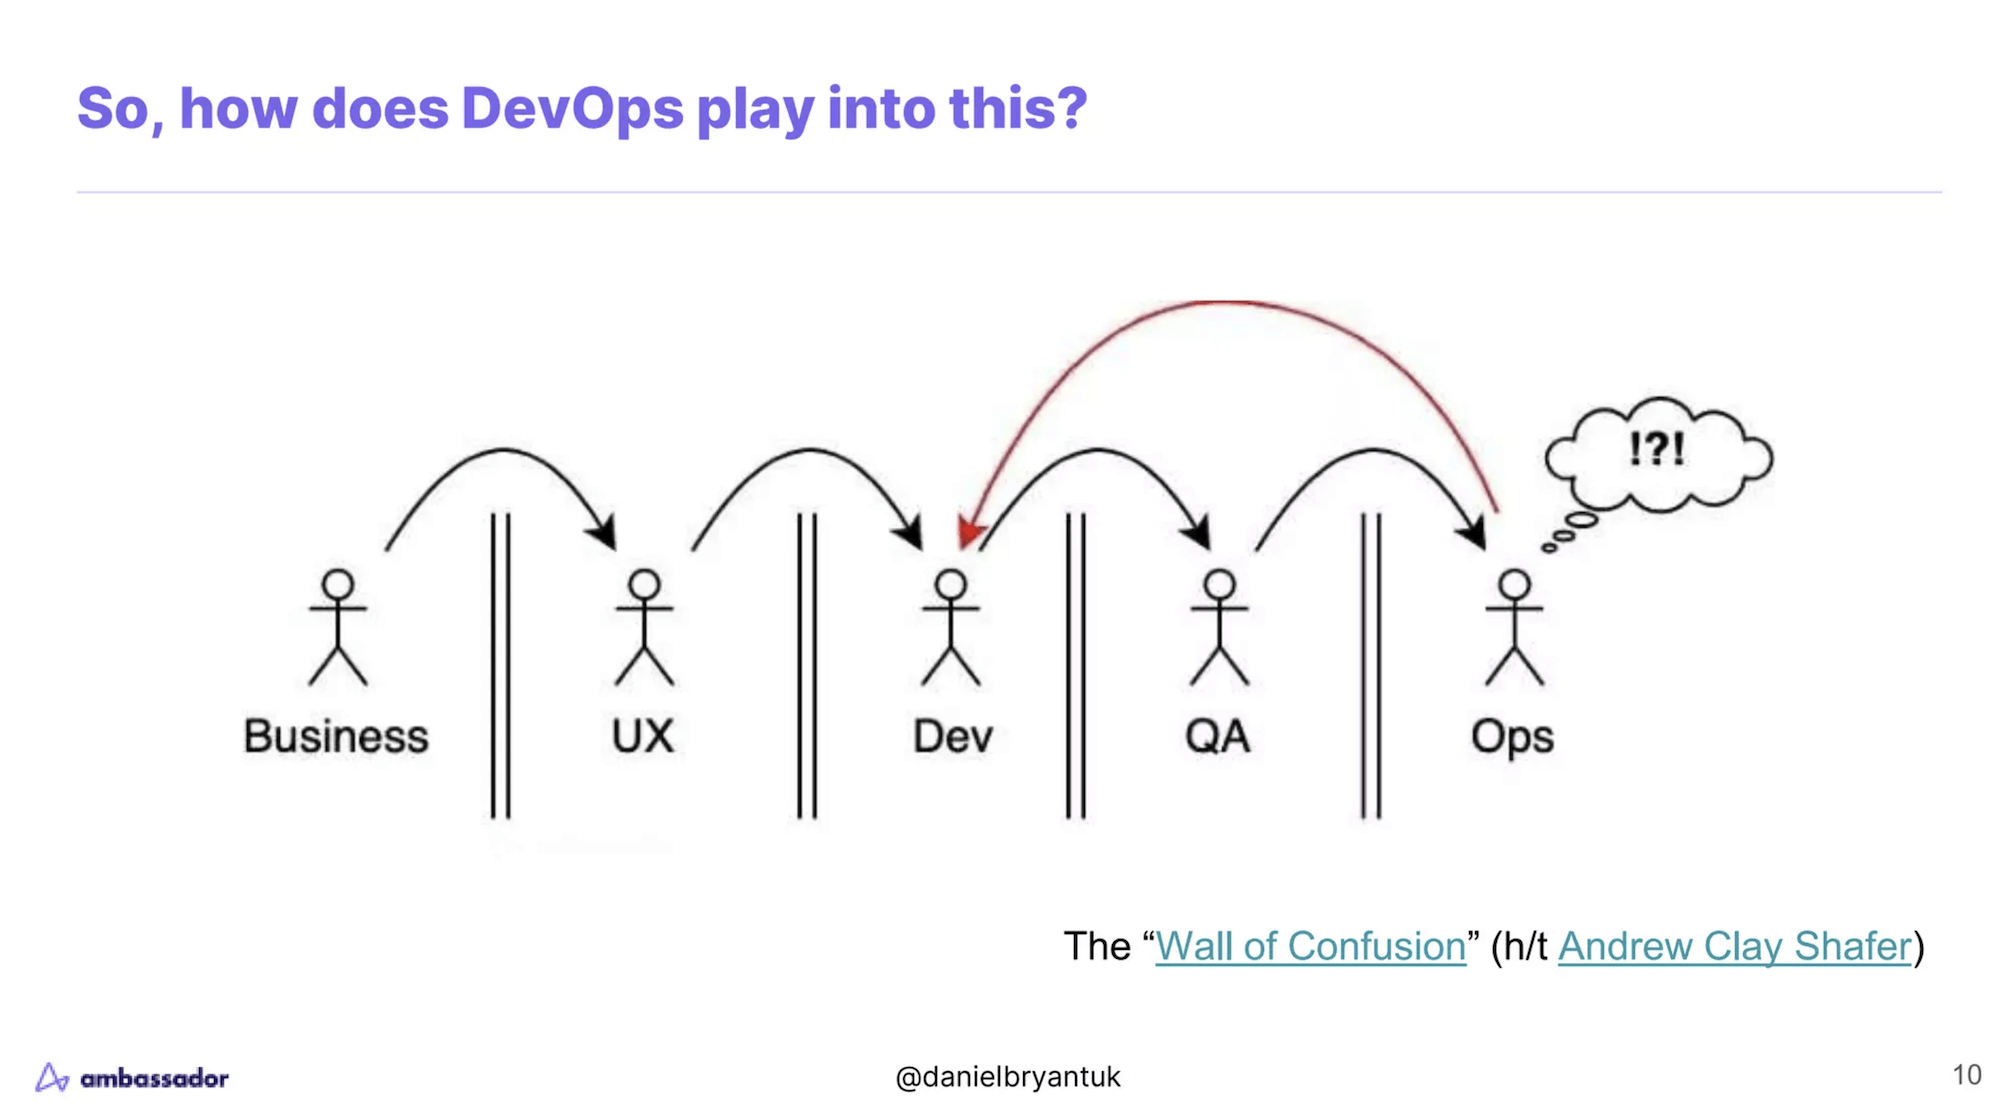 DevOps Silos. Text says "So, how does DevOps play into this? The picture shows stick-figures separated by walls, for Business, UX, Dev, QA and Ops. Each figure has an arrow, over the wall, to the next, and Ops has an arrow back to Dev. Ops has a speech ballon saying "!?!"